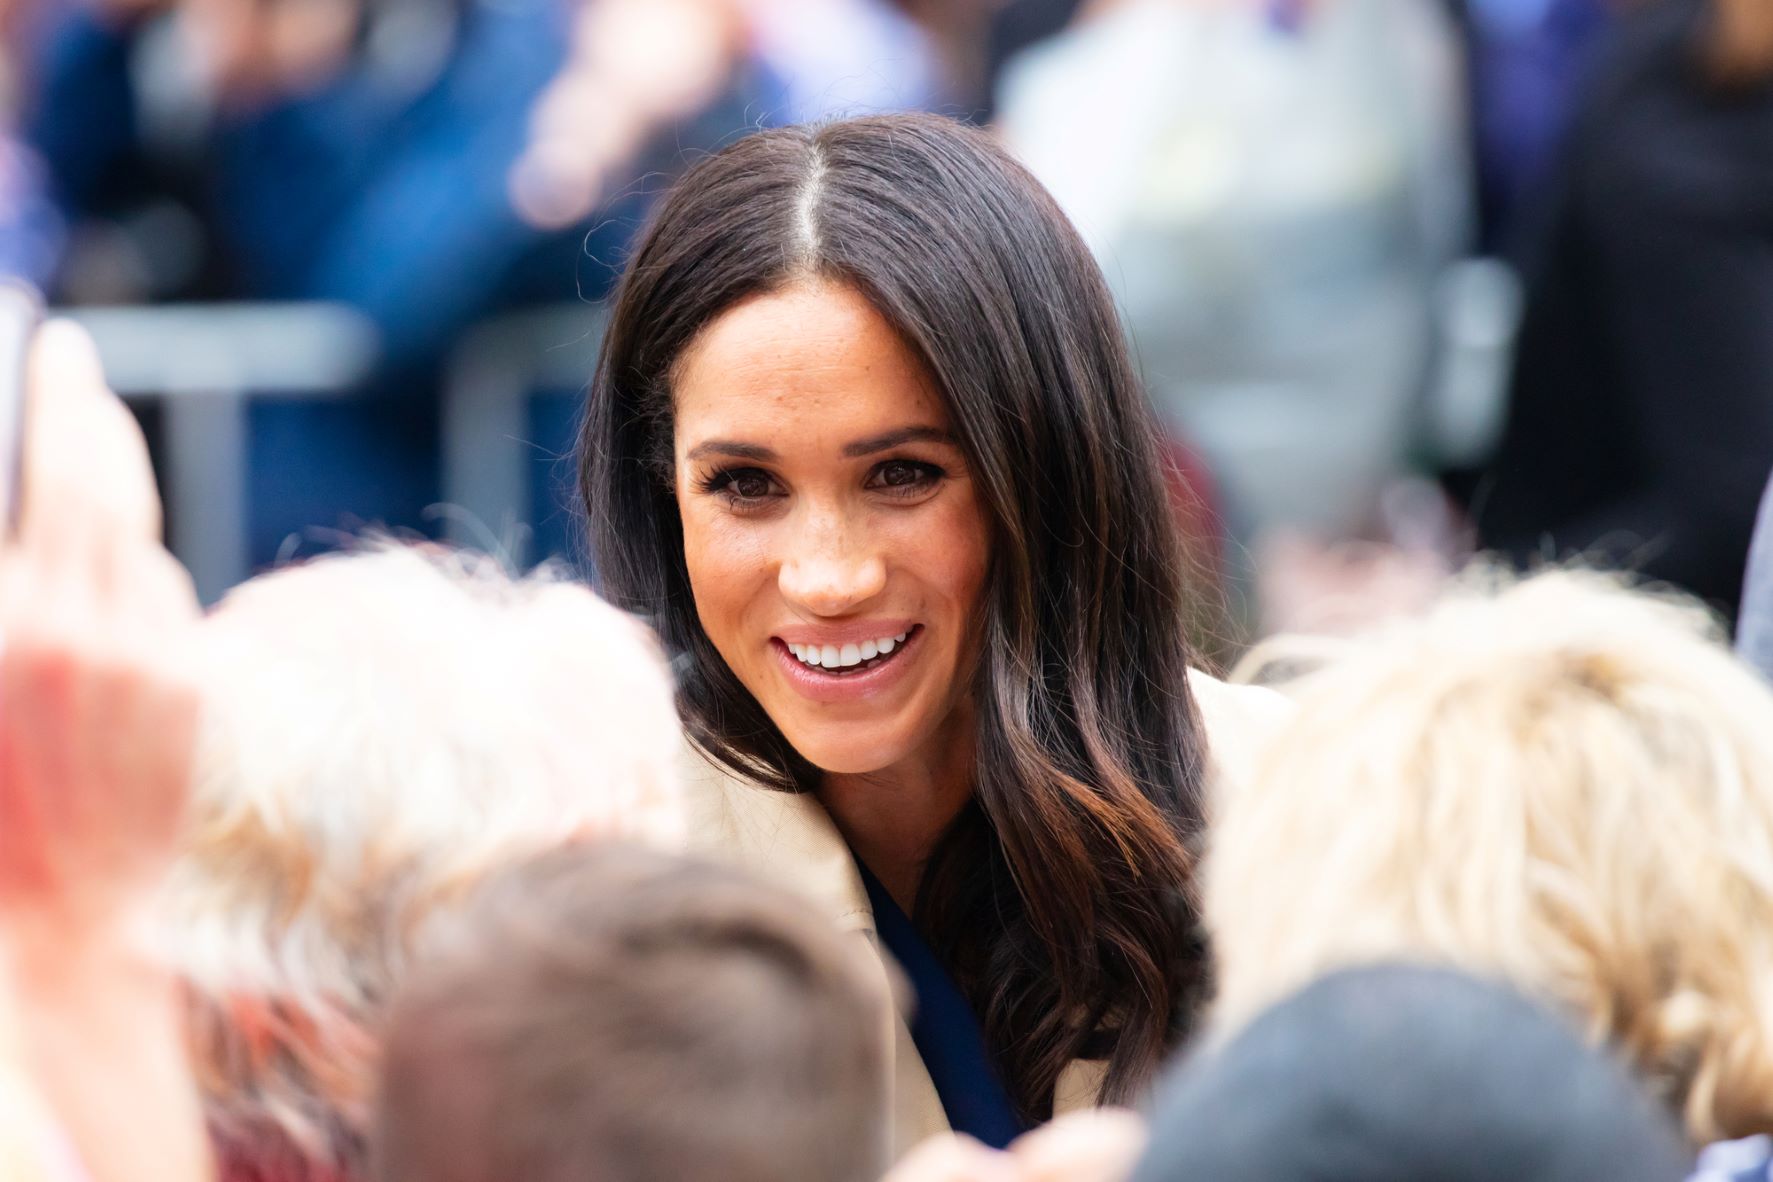 meghan-unveils-lifestyle-brand-amidst-speculation